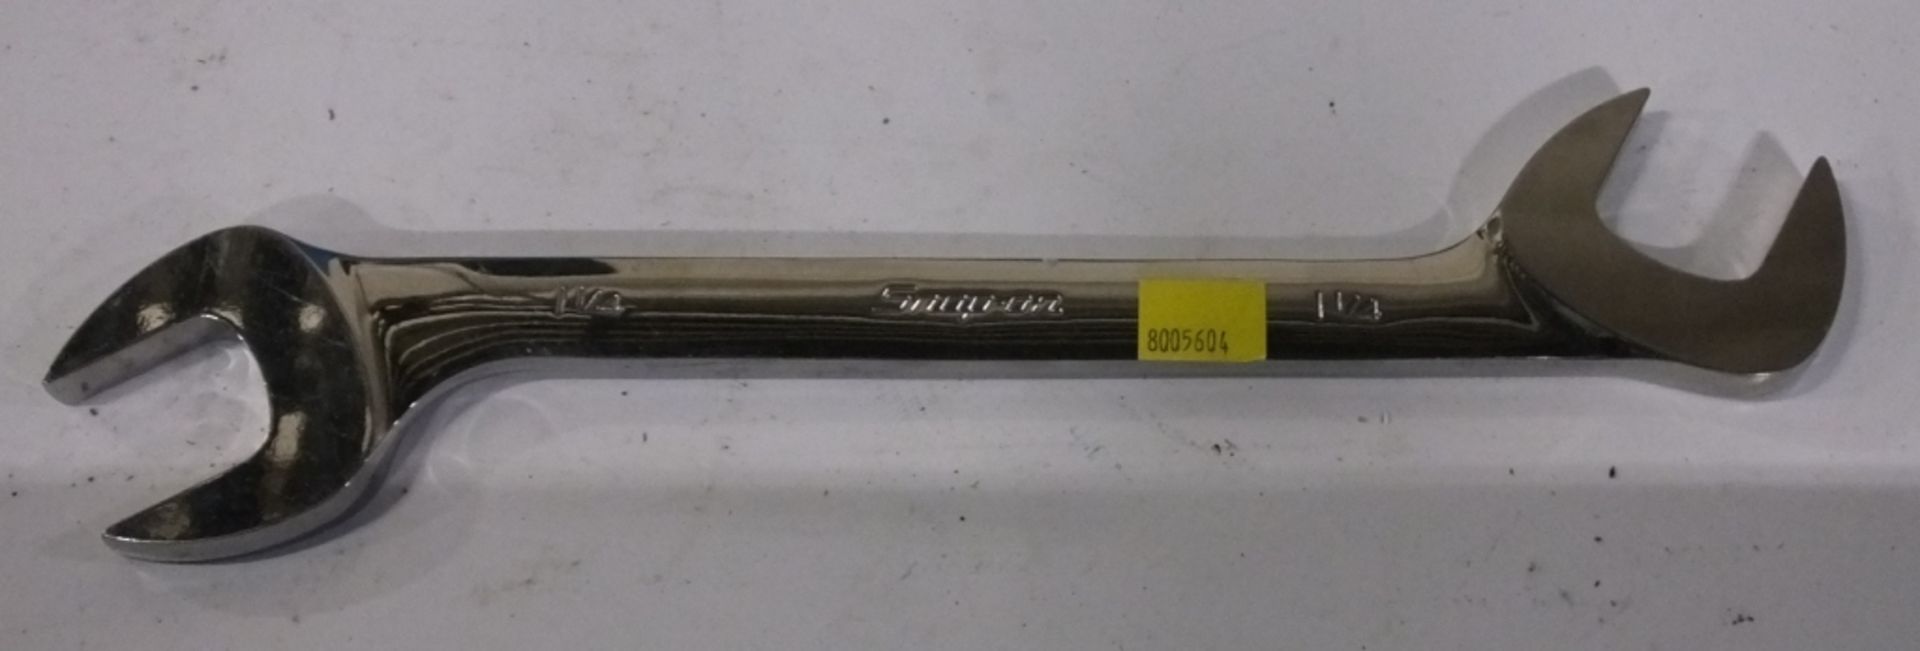 Snap-On spanner - 1 1/4